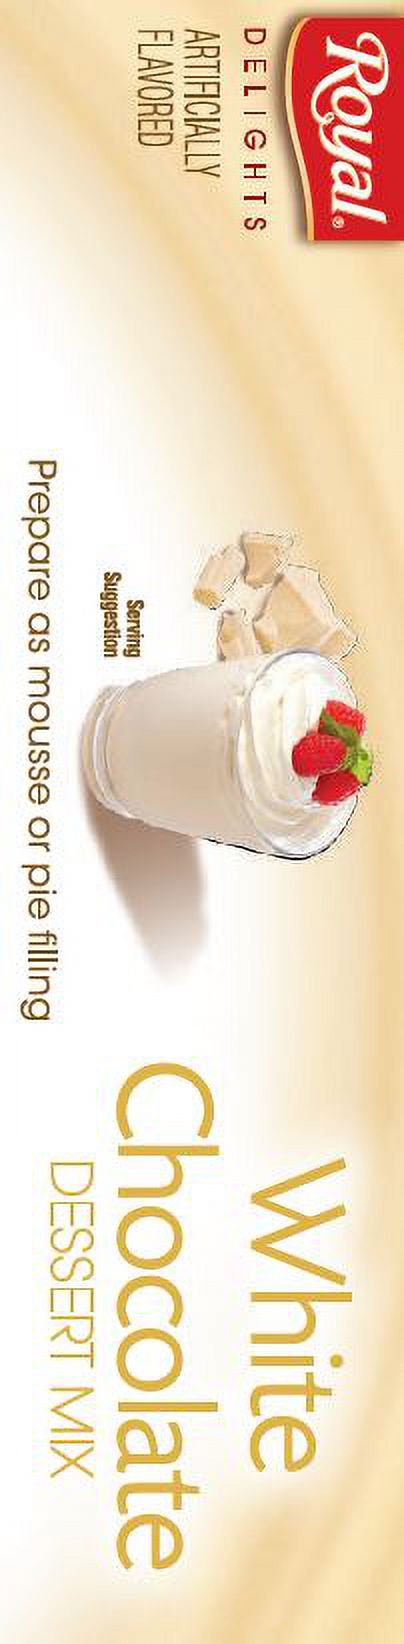 Royal Delights White Chocolate Dessert Mix - image 2 of 6